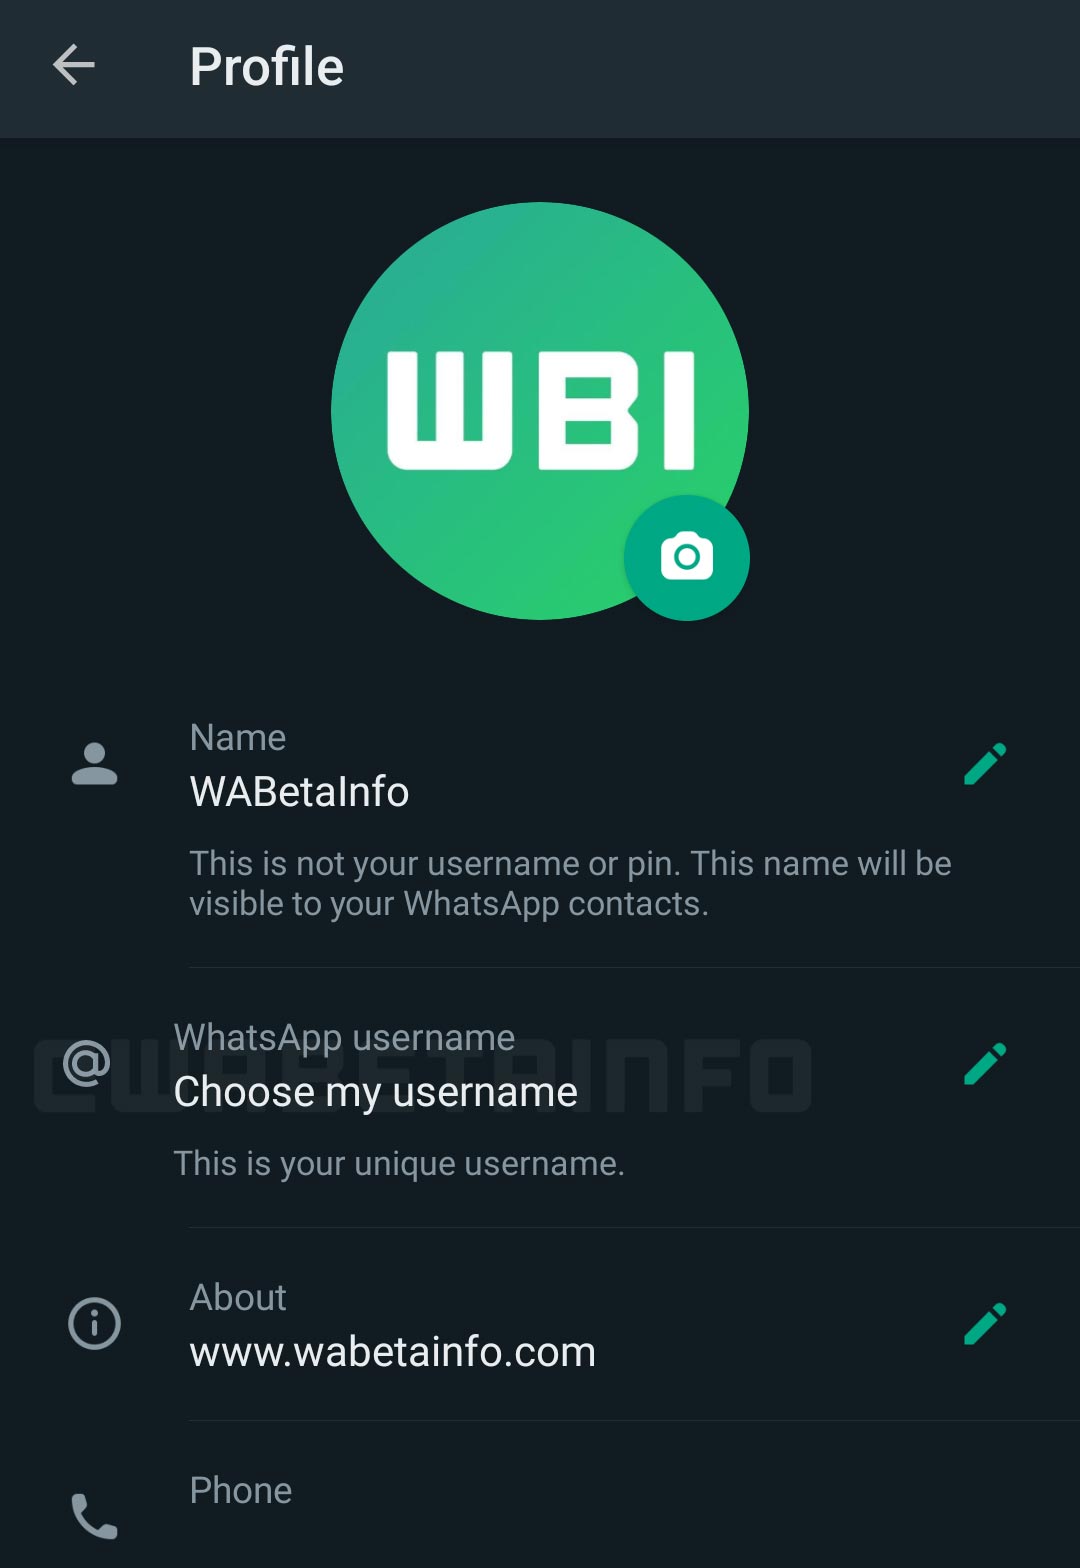 A screengrab of the future interface. — WABetainfo